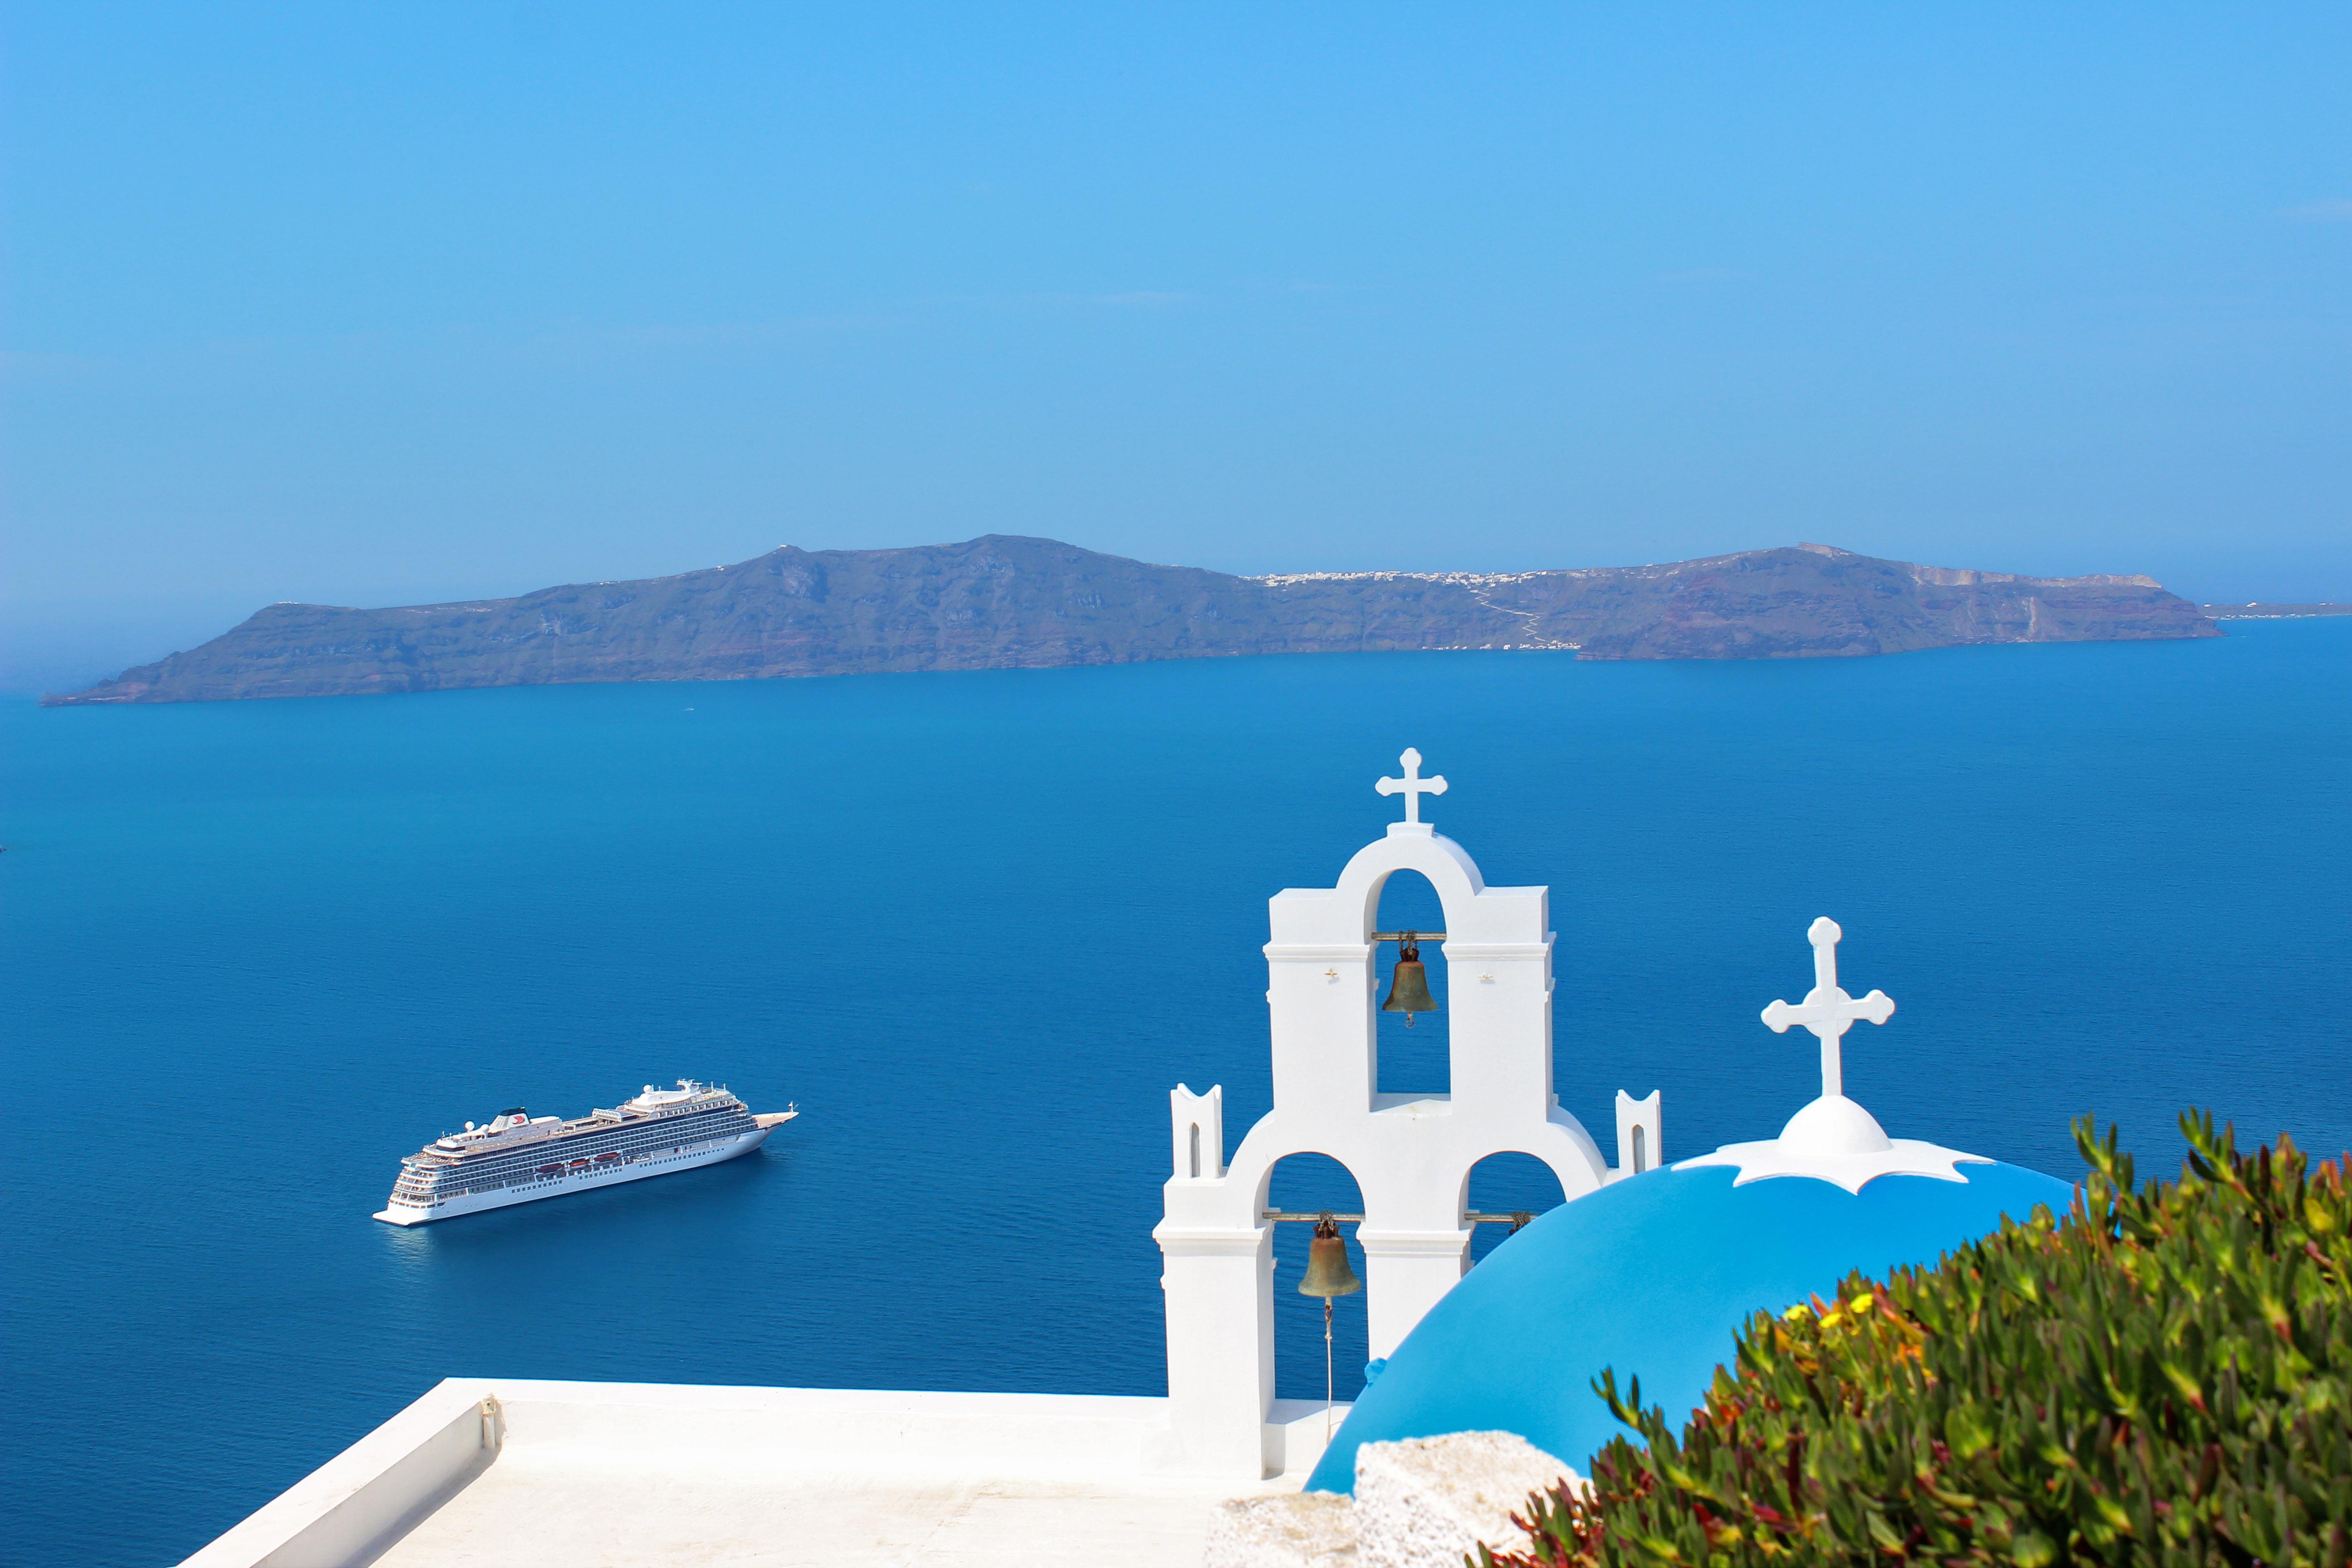 Journey to famed cities and ports like Santorini, Greece with Europe cruises